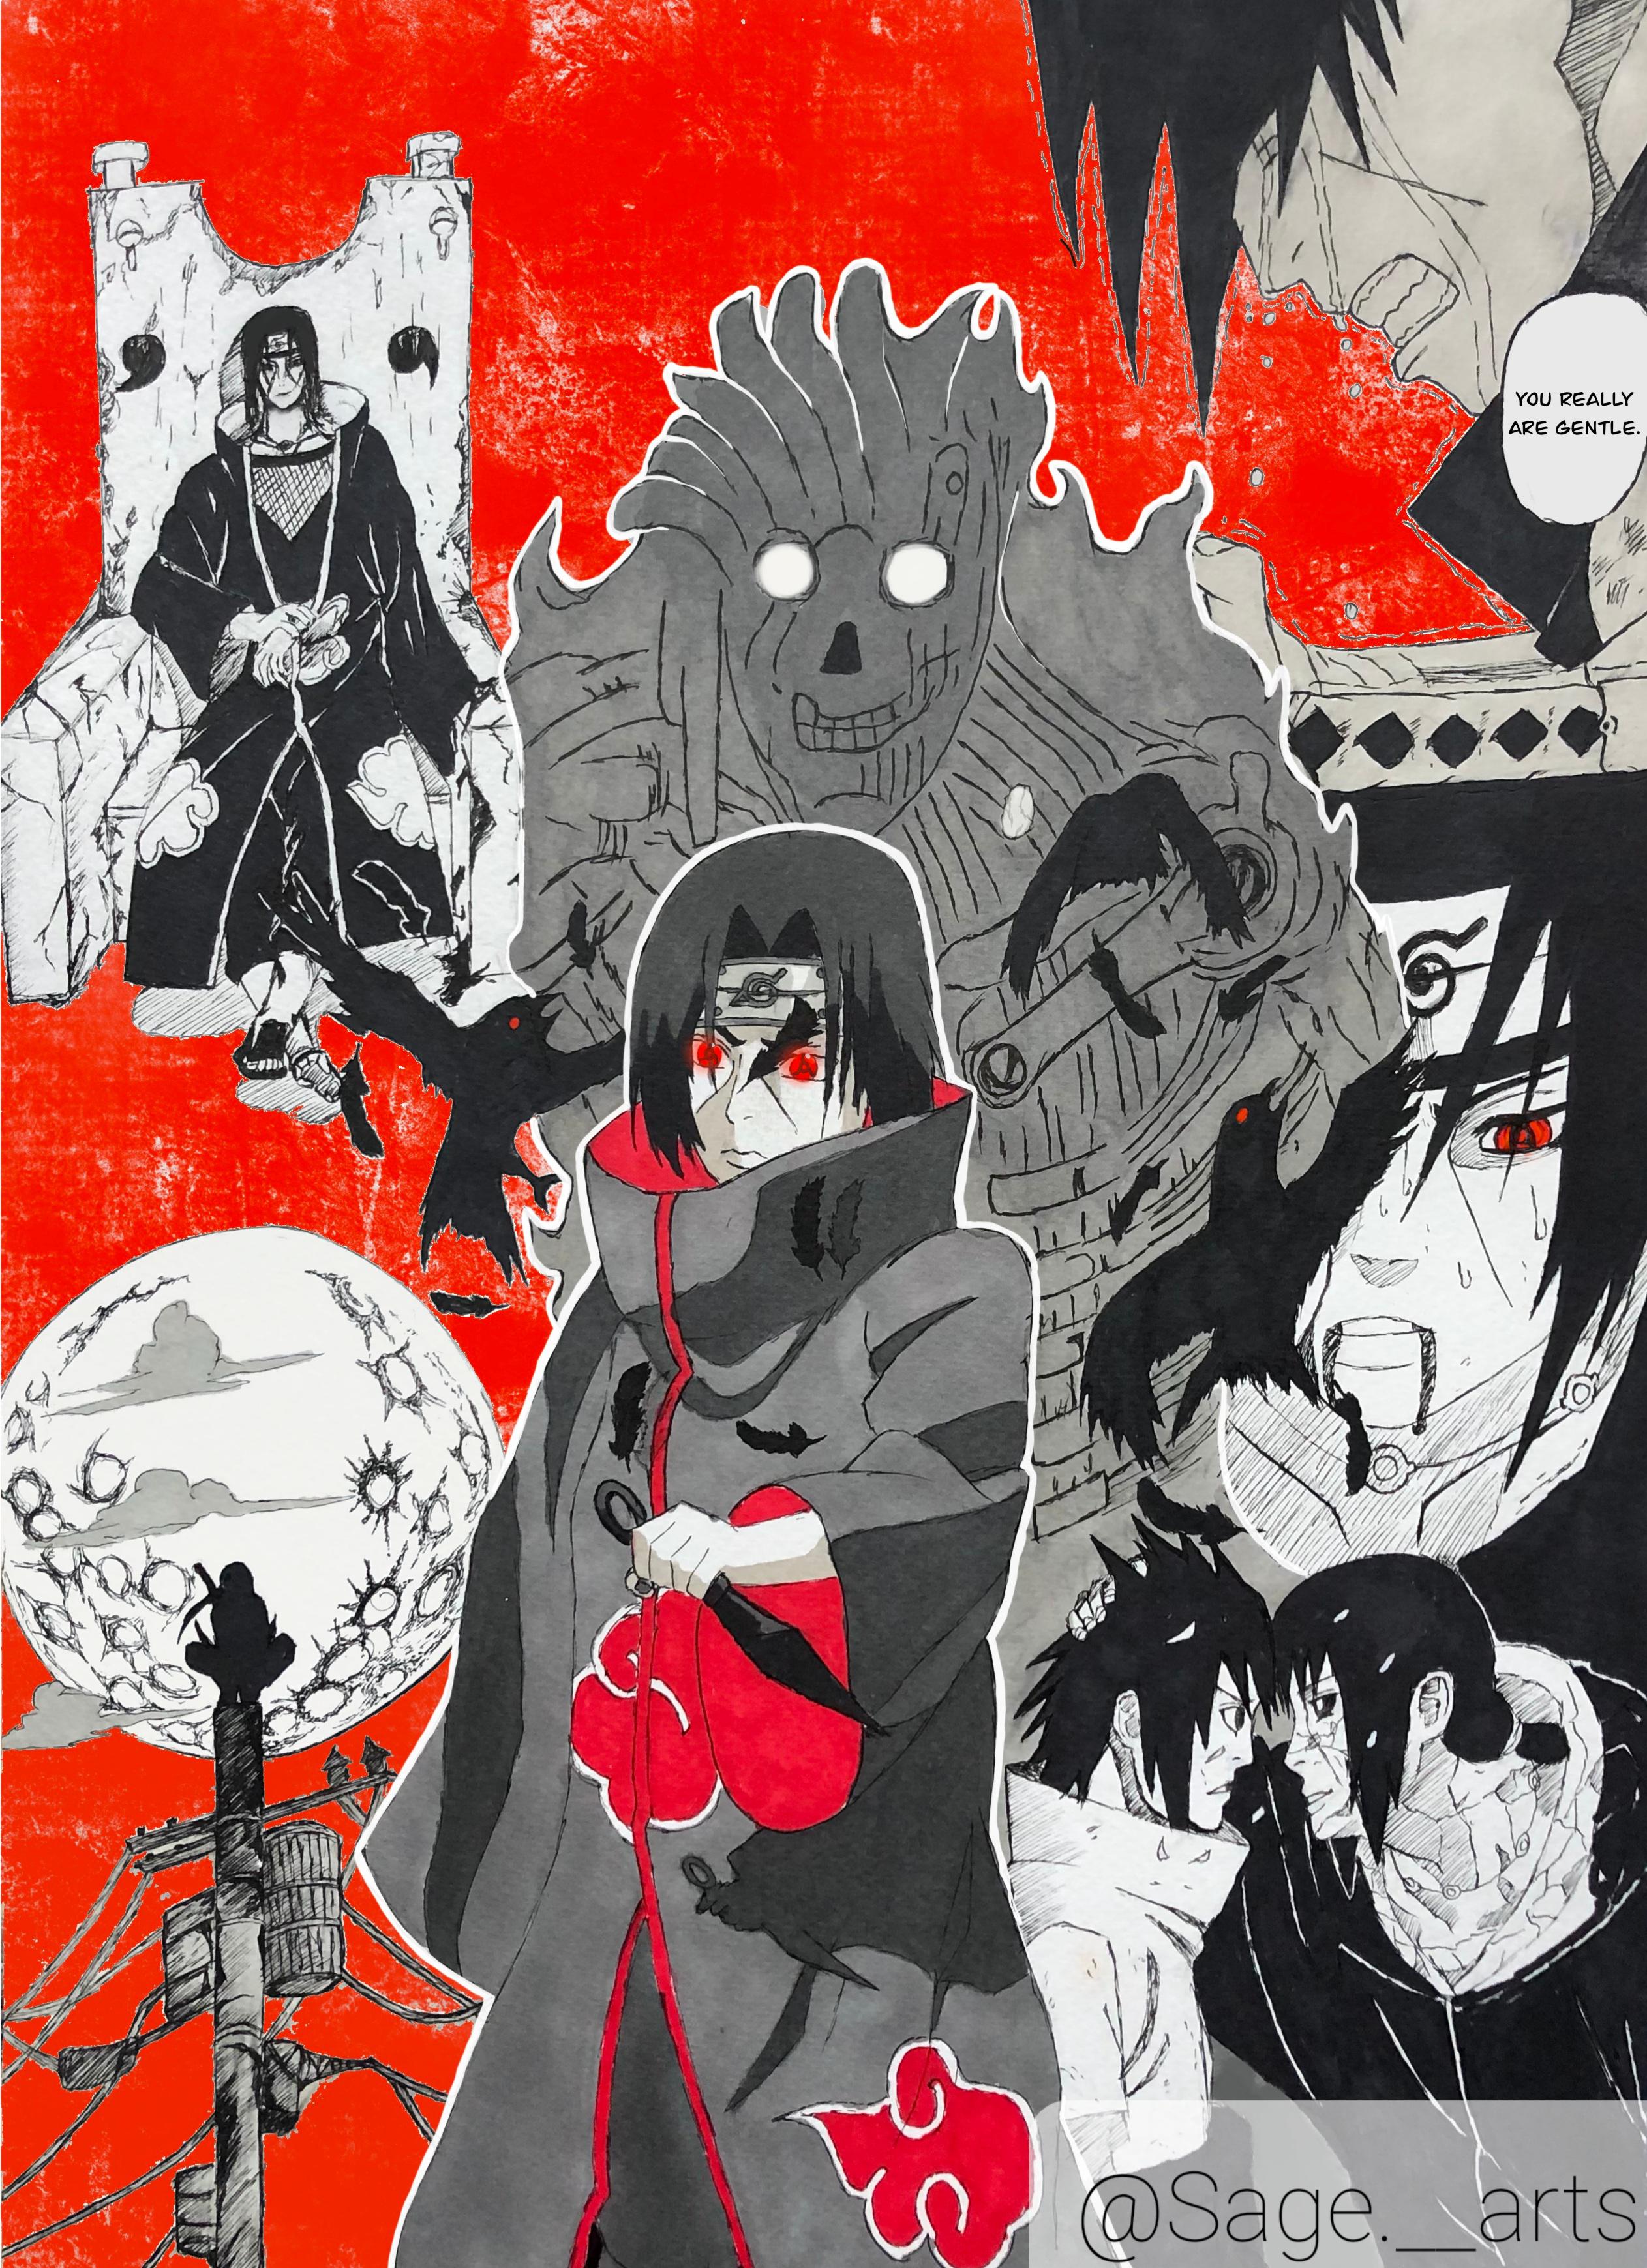 UCHIHA ITACHI, The Greatest Shinobi. This One Took Almost 10 12 Hours To Complete, It Is Drawn In A A3 Sheet Plus I Used Procreate. Hope You All Like It :)